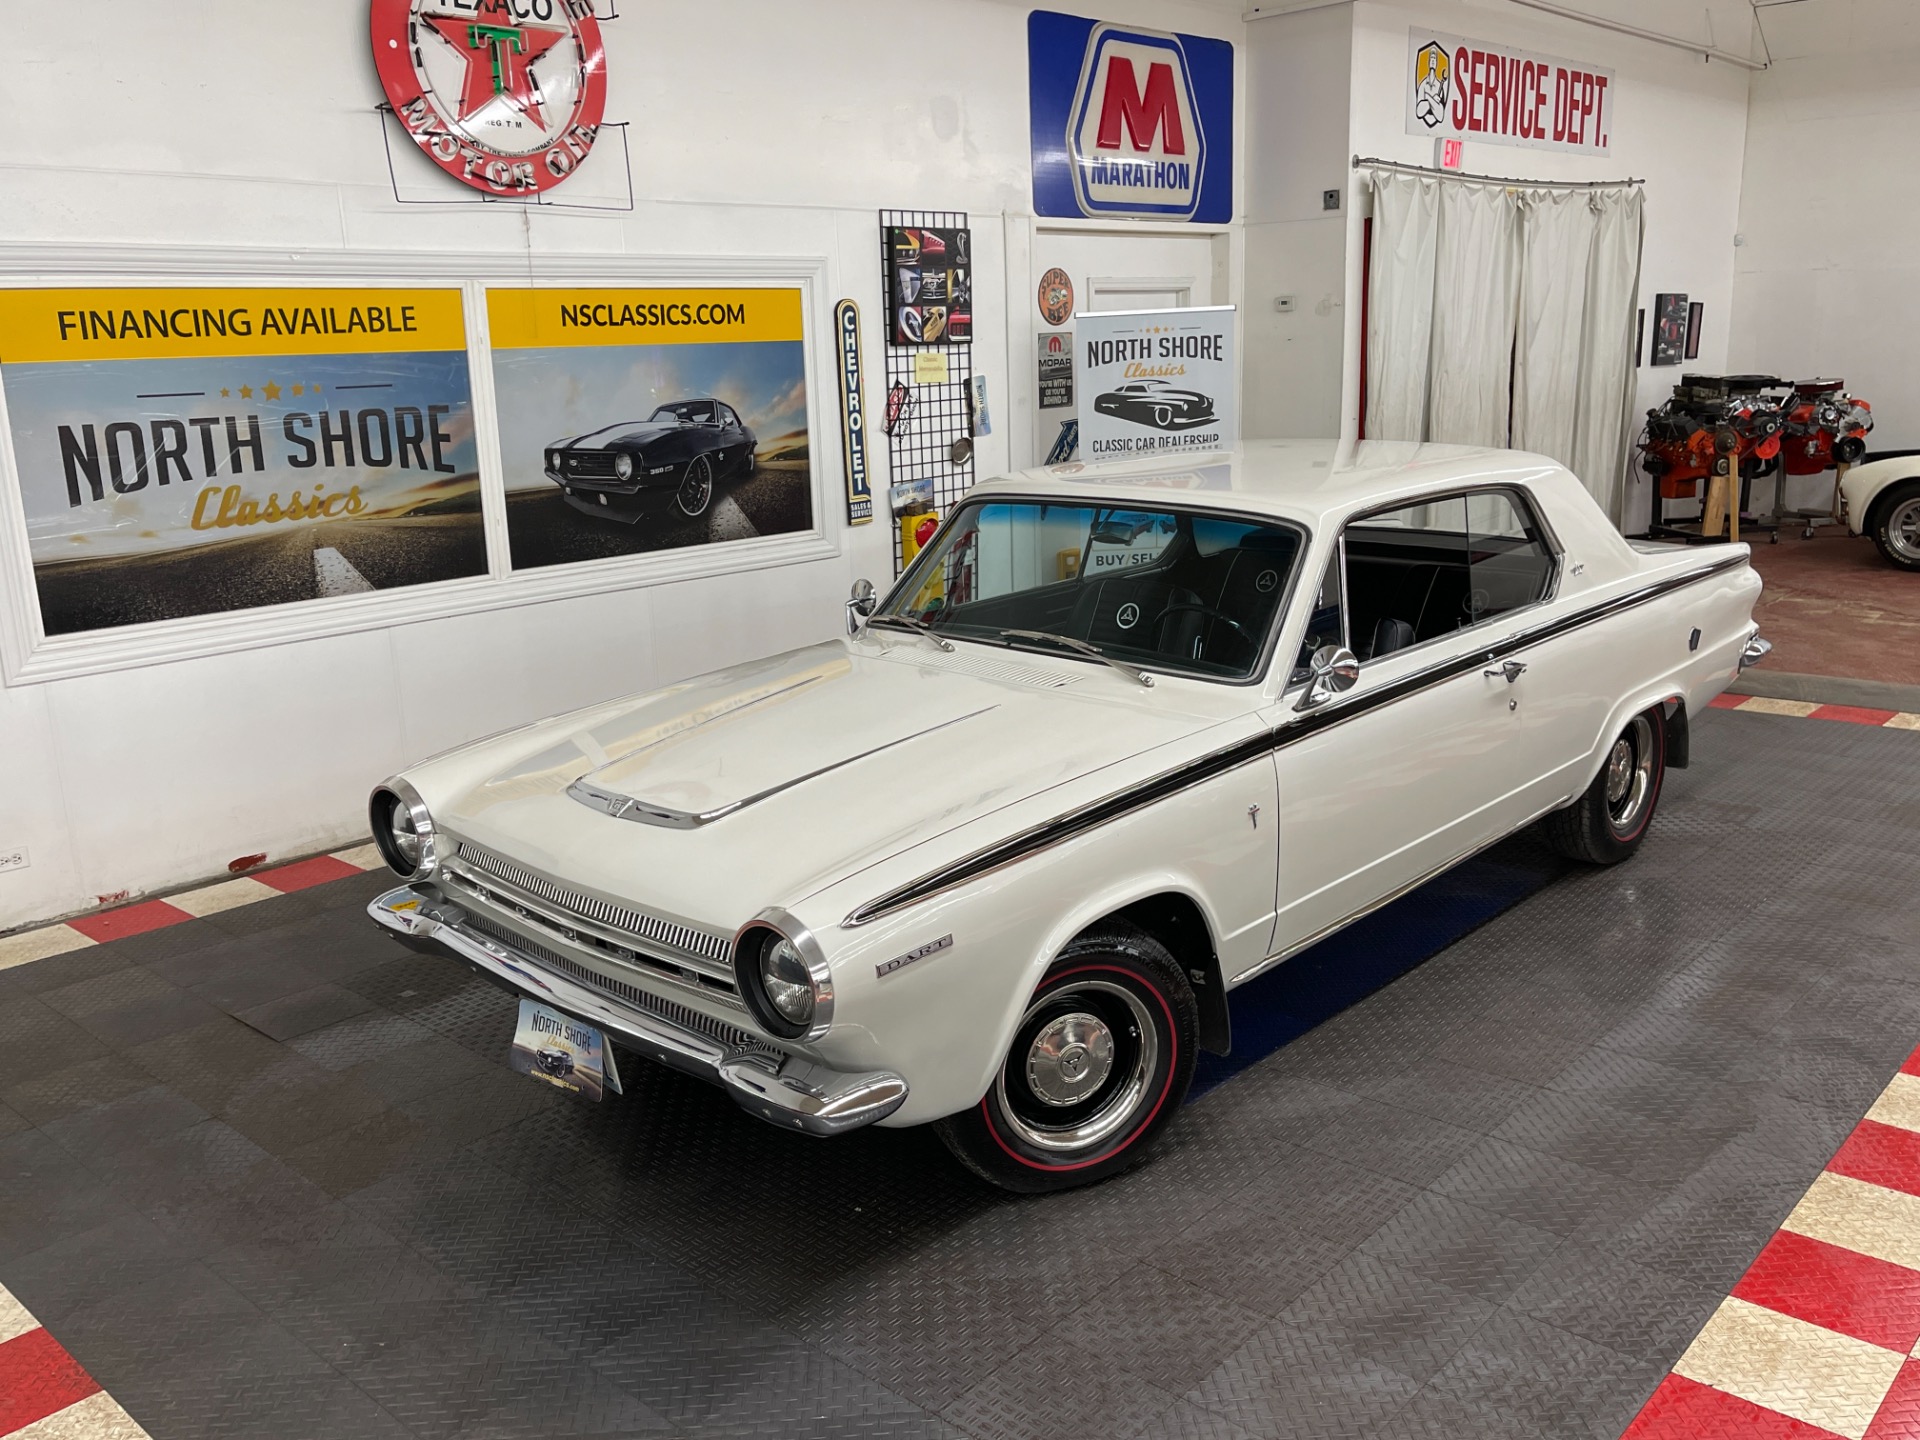 Used 1964 Dodge Dart - GT 273 V8 ENGINE - VERY CLEAN - DRIVES GREAT - SEE VIDEO